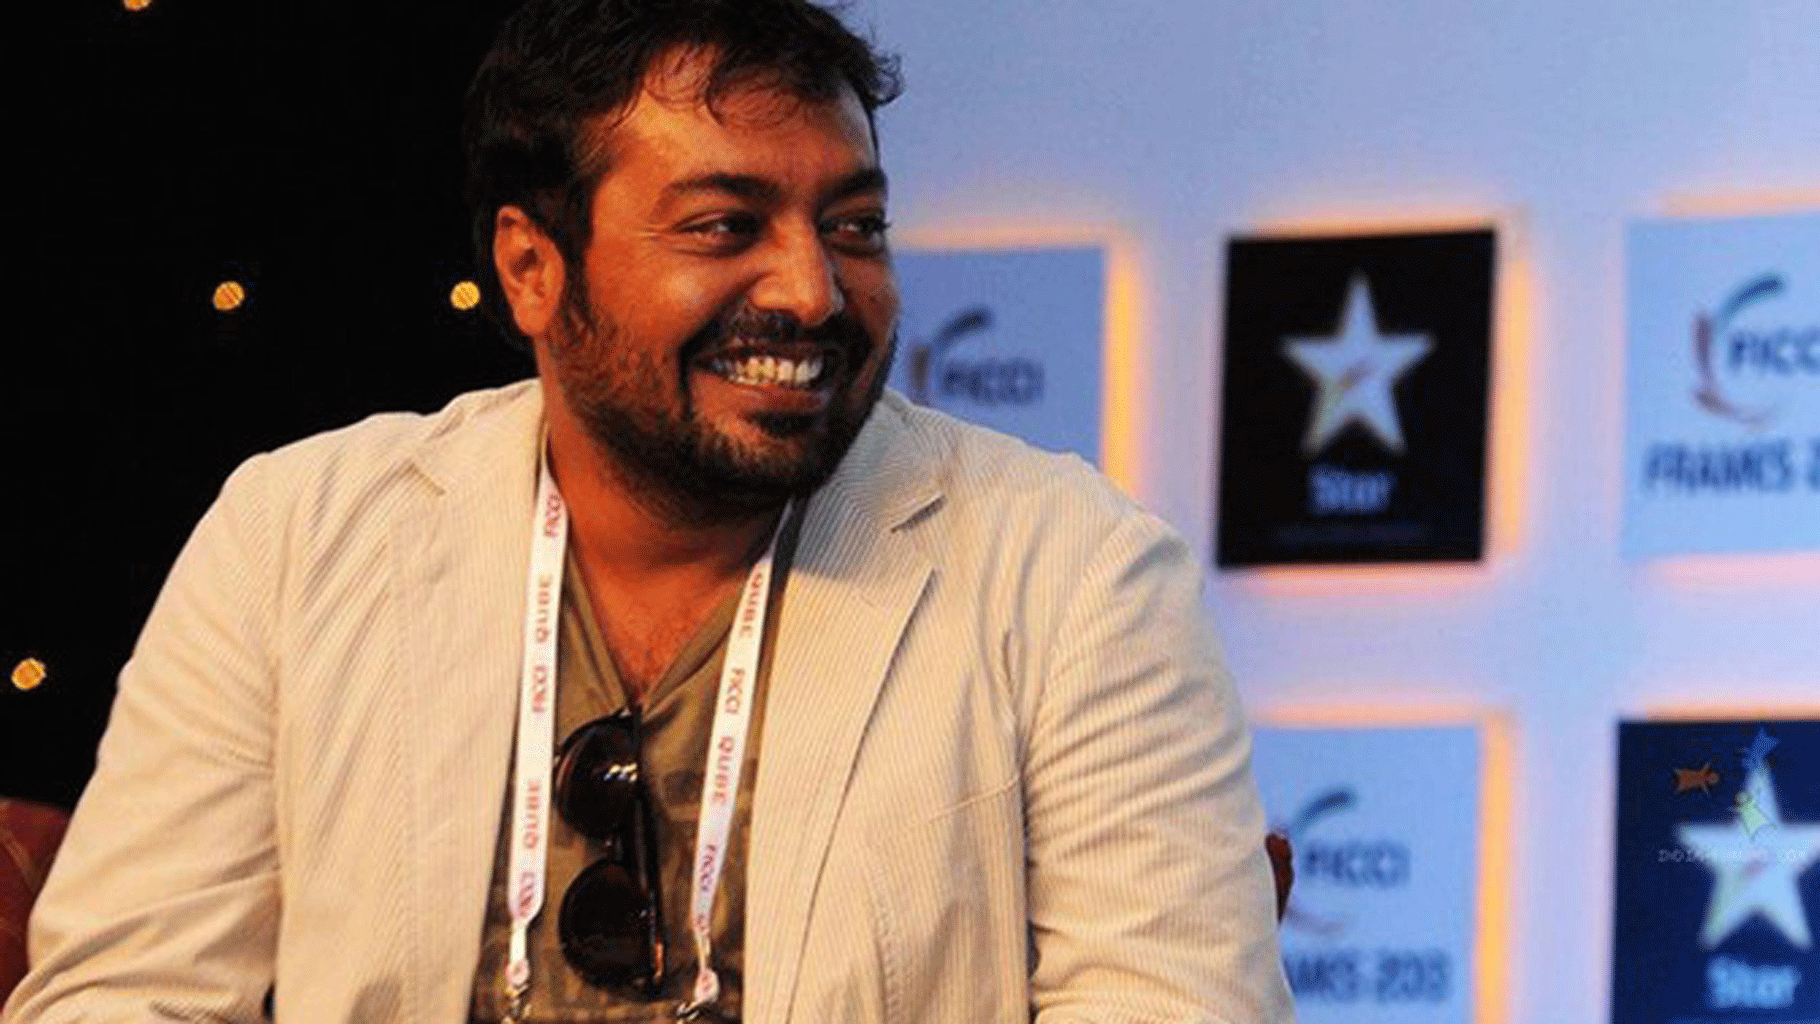 

Filmmaker Anurag Kashyap. (Photo: Twitter/<a href="https://twitter.com/Youngisthan/status/636858346088304640">@Youngisthan</a>)